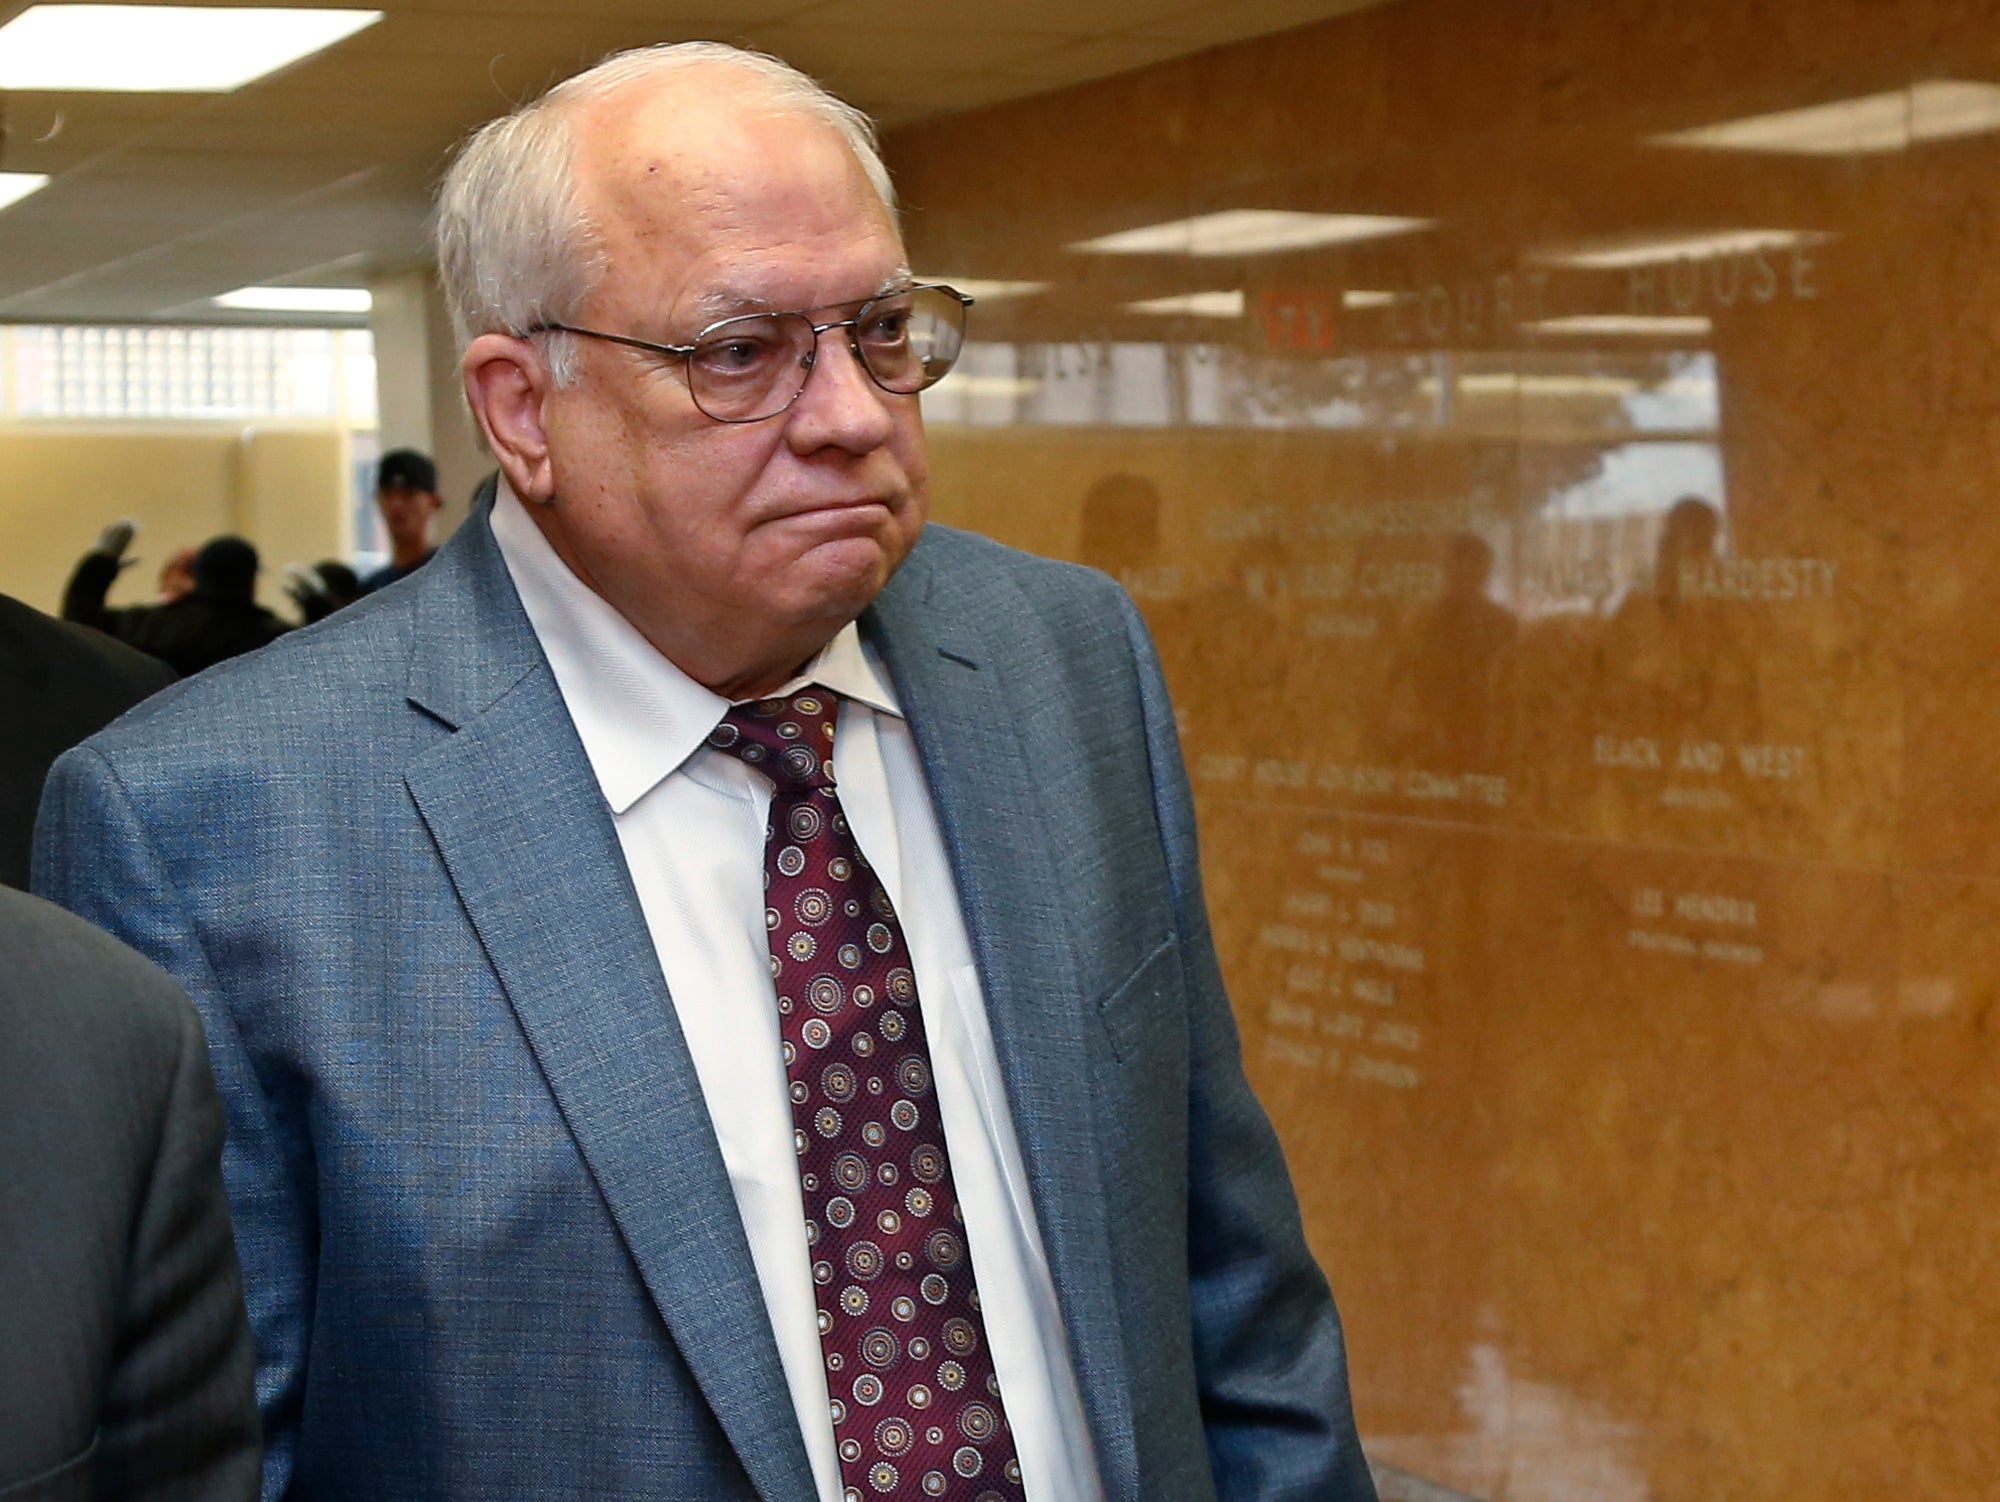 Oklahoma Reserve Deputy Convicted in Fatal 2015 Shooting of Eric Harris
